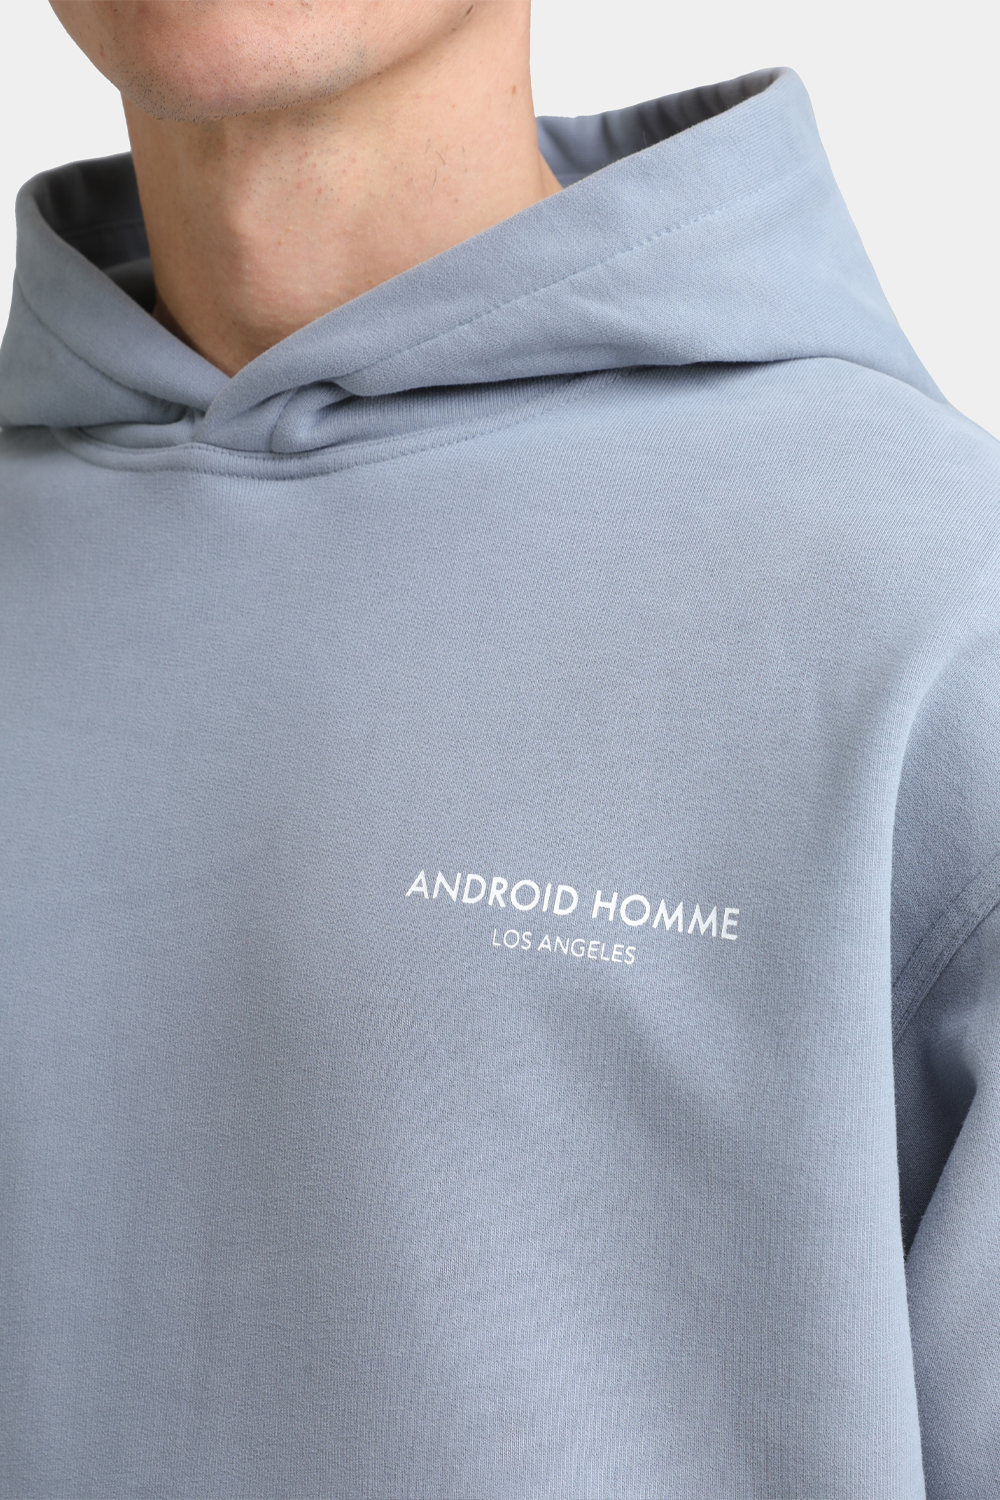 Buy the Android Homme Run Division Hoodie in Grey at Intro. Spend £50 for free UK delivery. Official stockists. We ship worldwide.